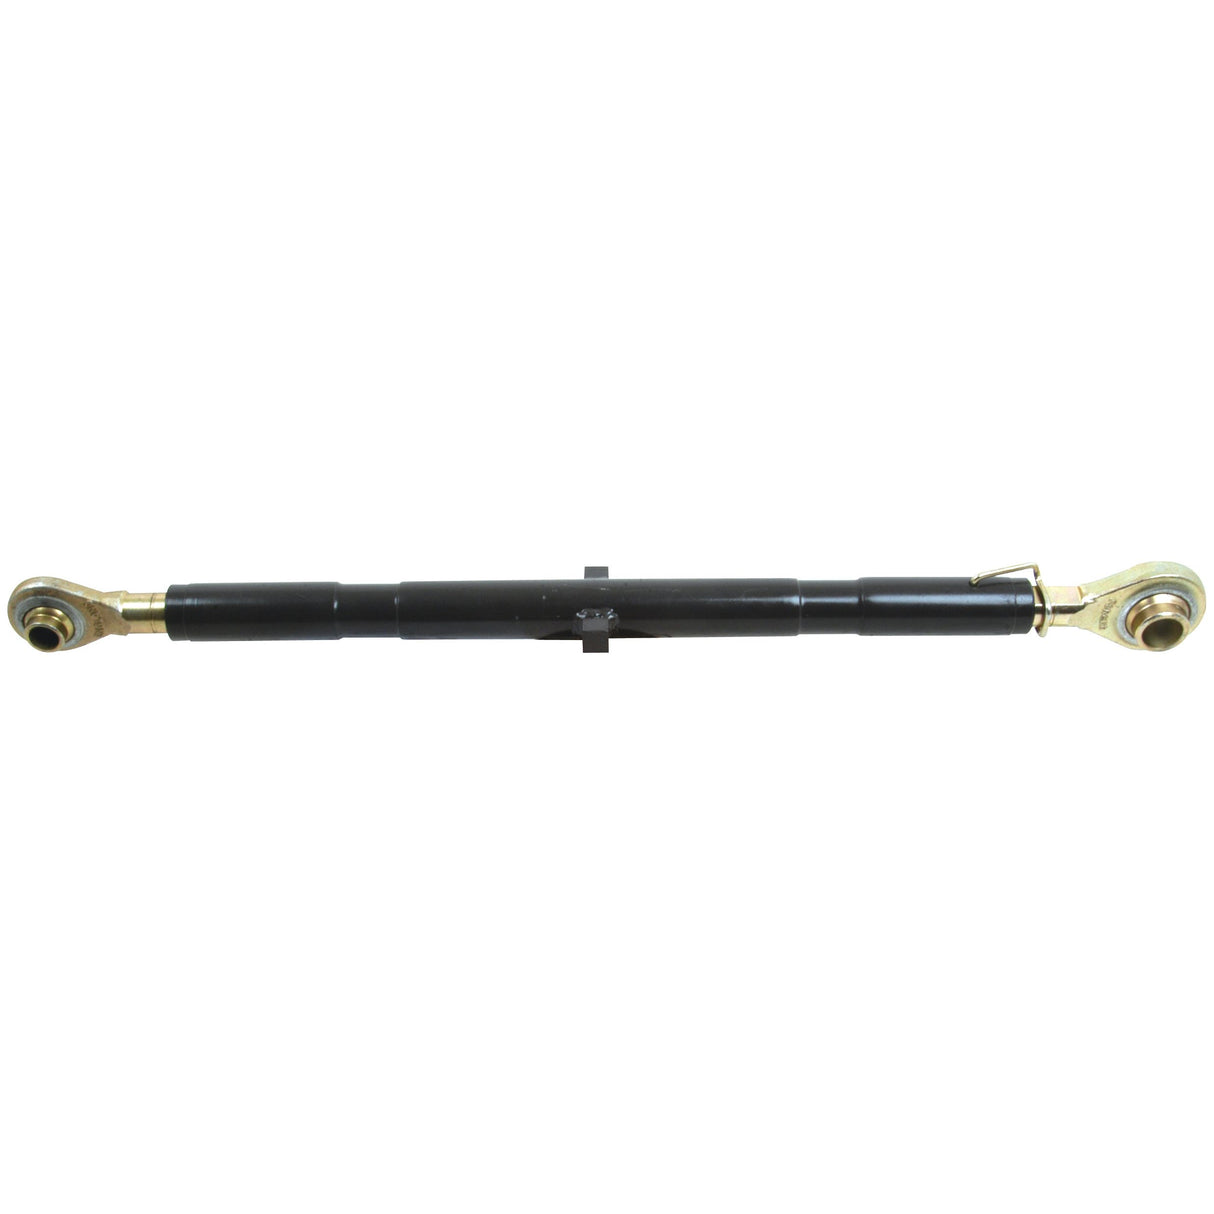 Top Link (Cat.2/2) Ball and Ball,  1 1/16'', Min. Length: 670mm.
 - S.15888 - Farming Parts